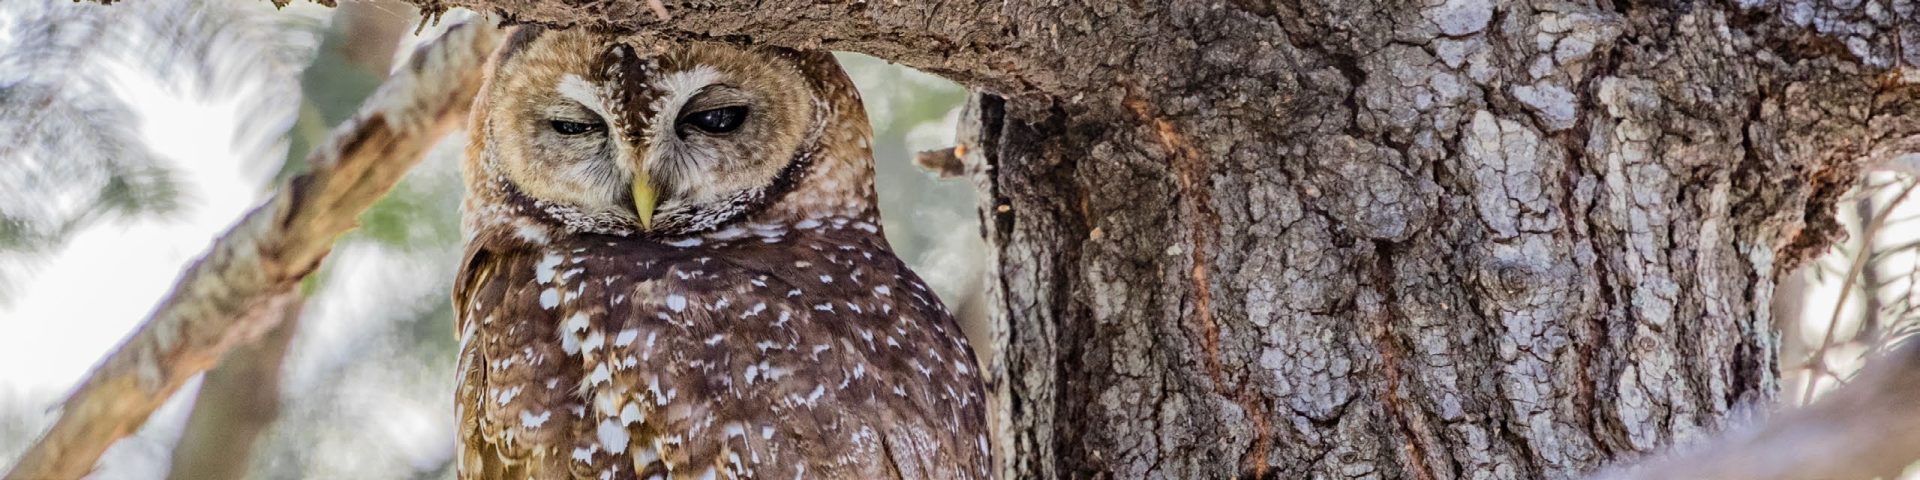 Owl at Walnut Canyon National Monument